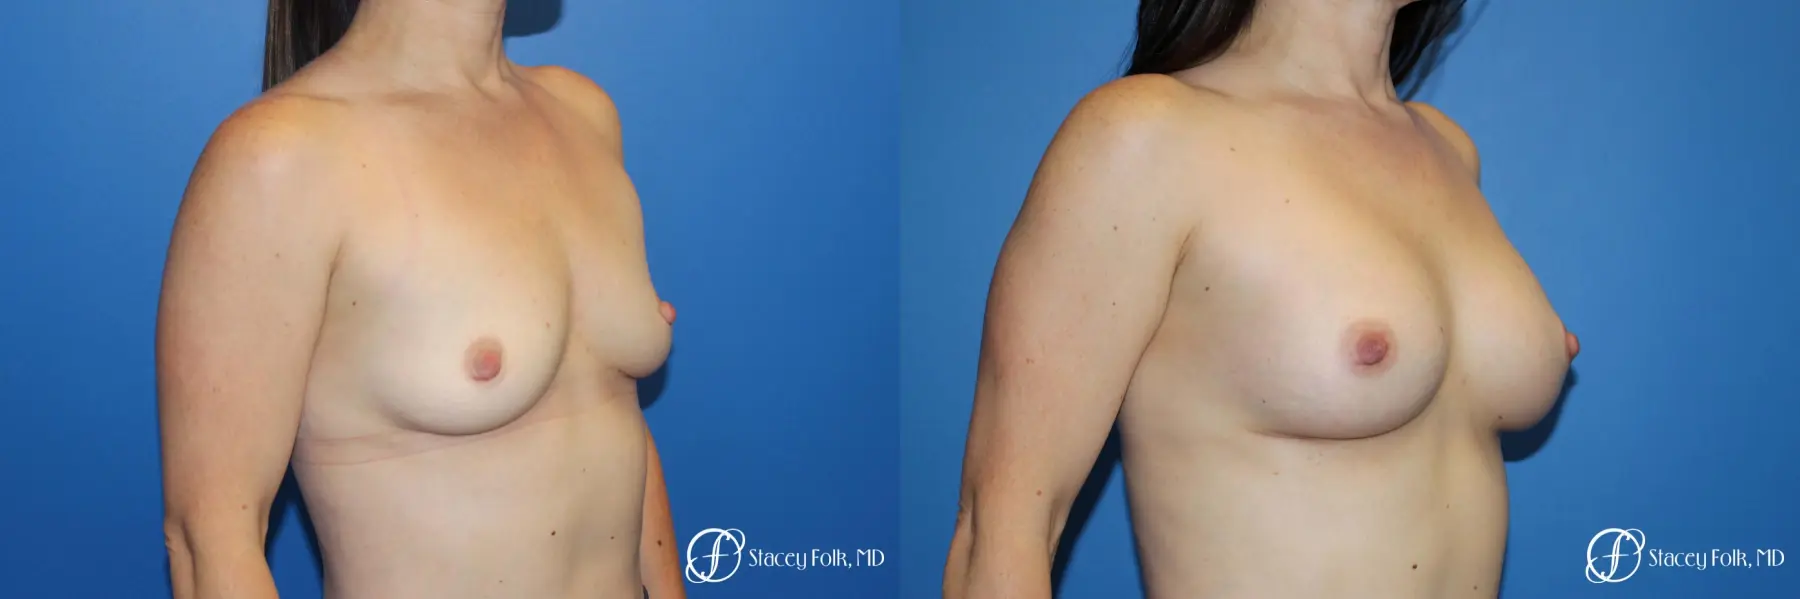 Breast augmentation with Natrelle Inspira breast implants - Before and After 2